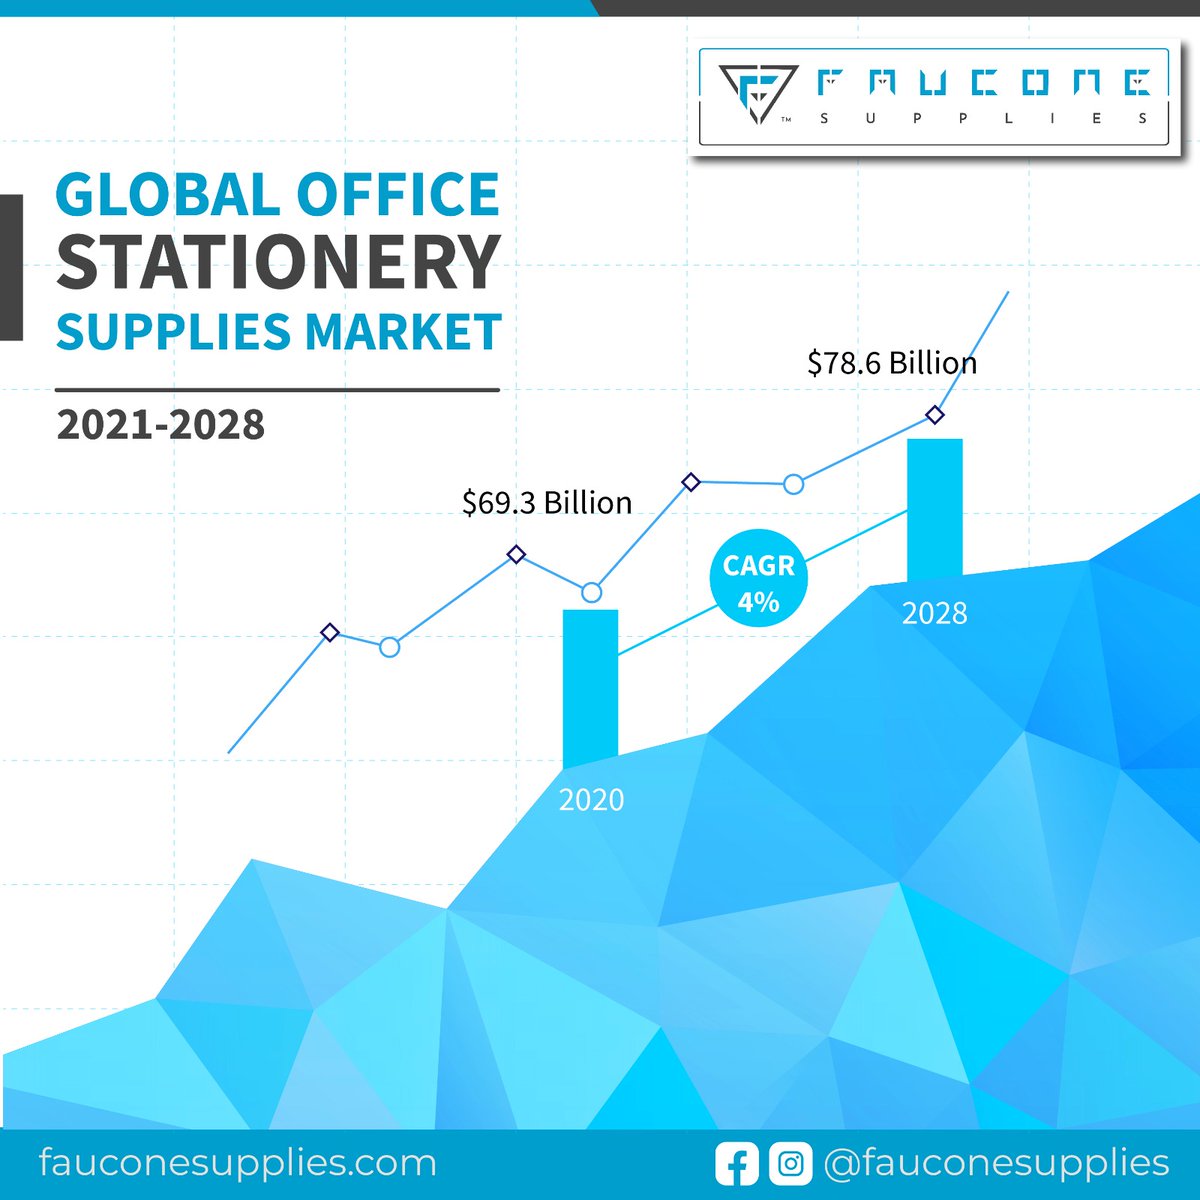 For more details, 
1800 309 4377
fauconesupplies.com

#faucone #fauconesupplies #supplies #officesupplies #stationary #globally #suppliesmarket #cagr #office #workplace #businessoffice #shipping #easyreturns #bulkorders #officesupply #corporatesupplies #commercialsupplies